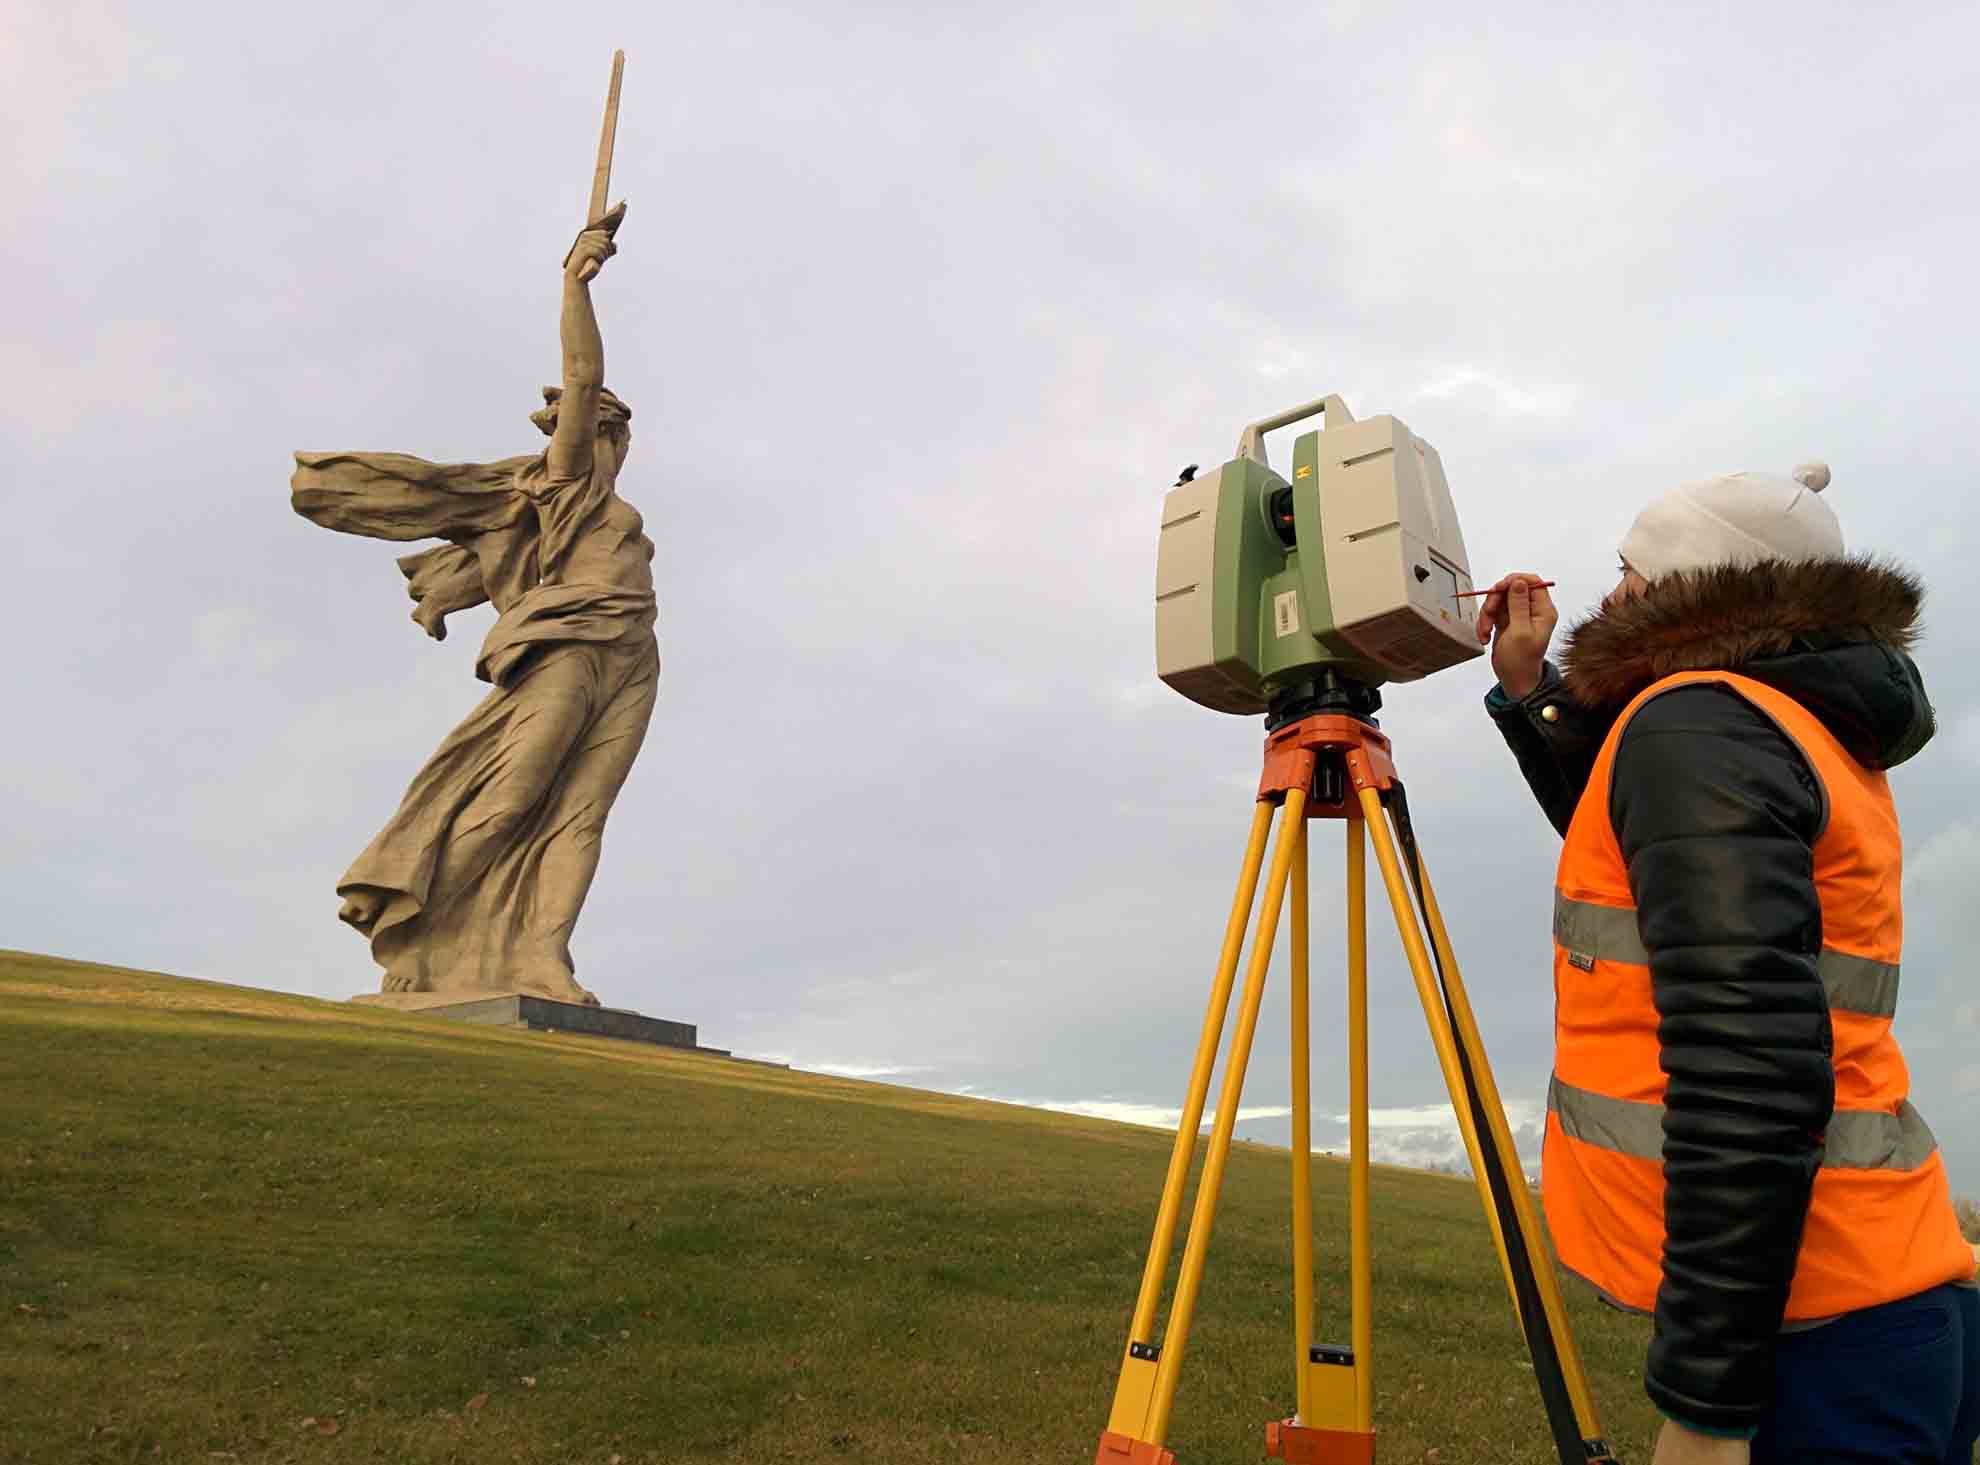 Laser scanning of the sculpure